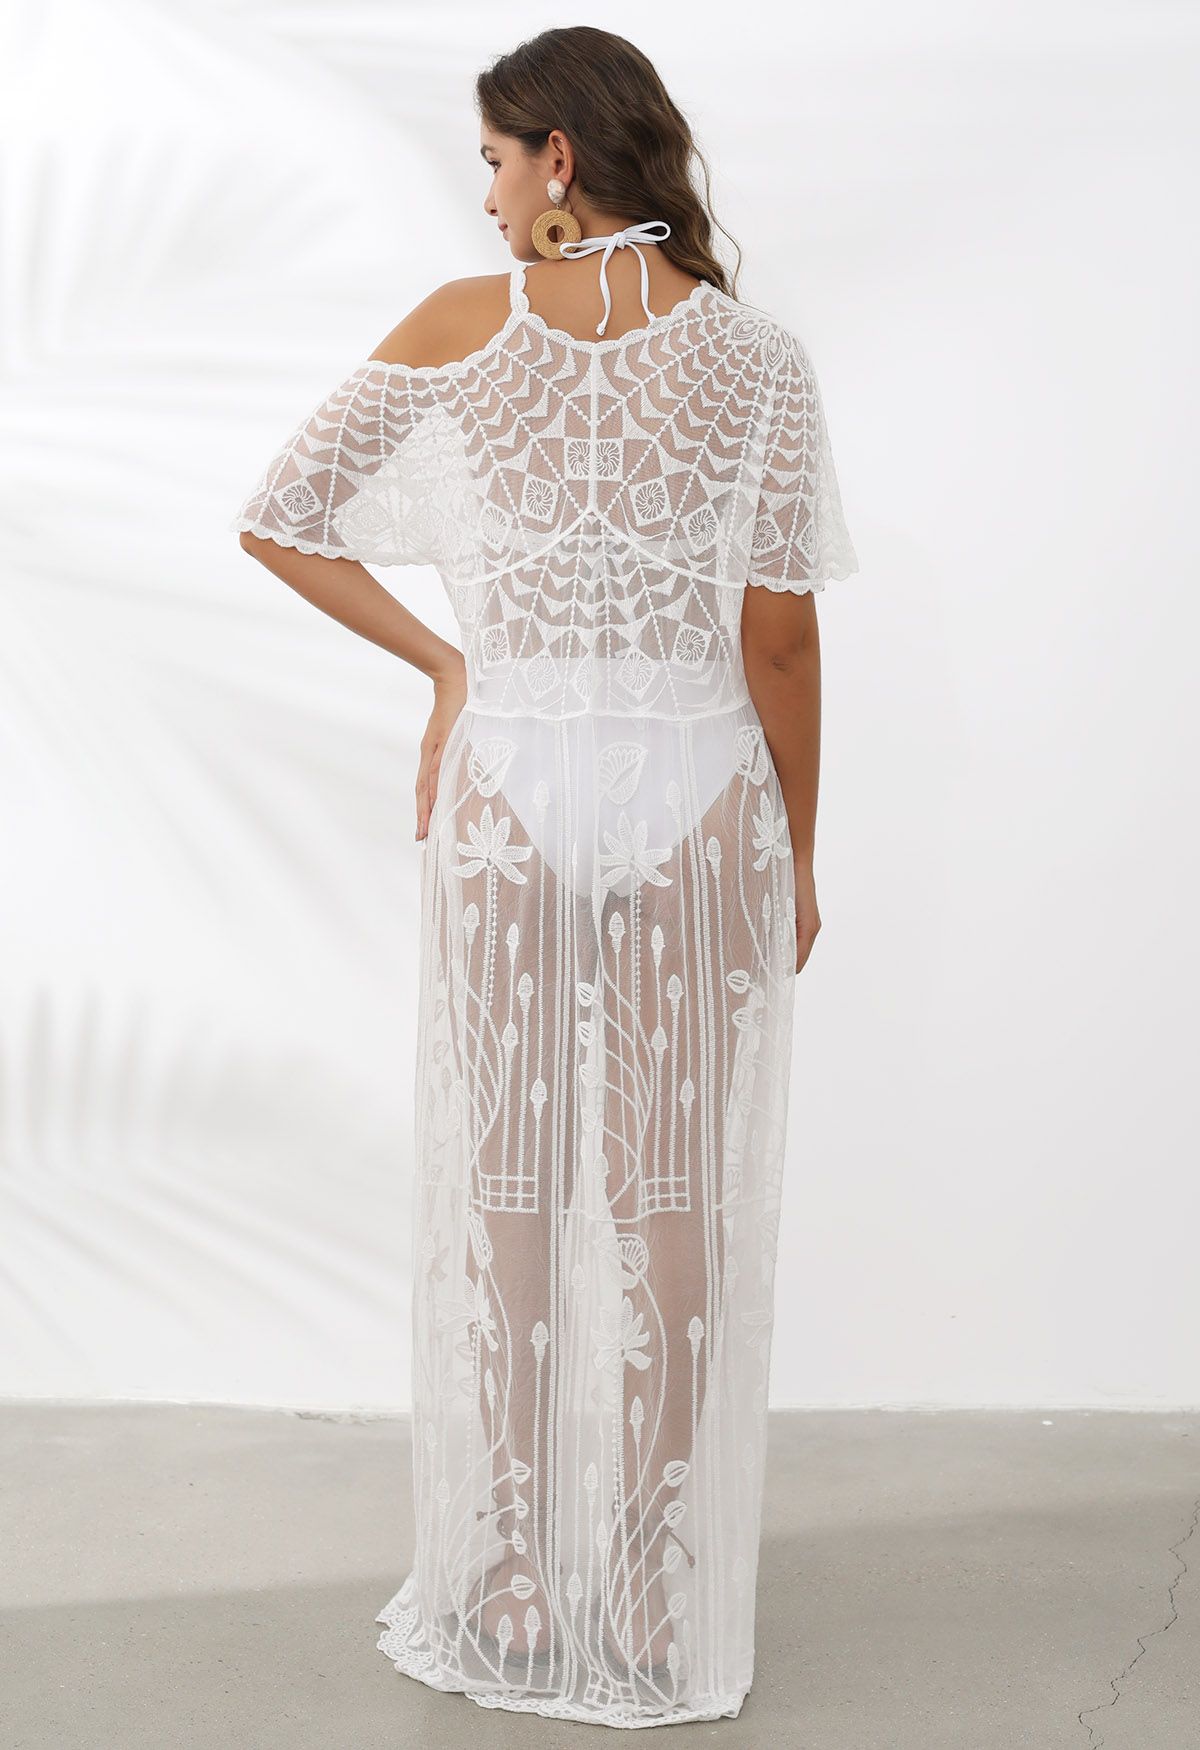 Embroidered Lace Cutout Shoulder Cover-Up Dress